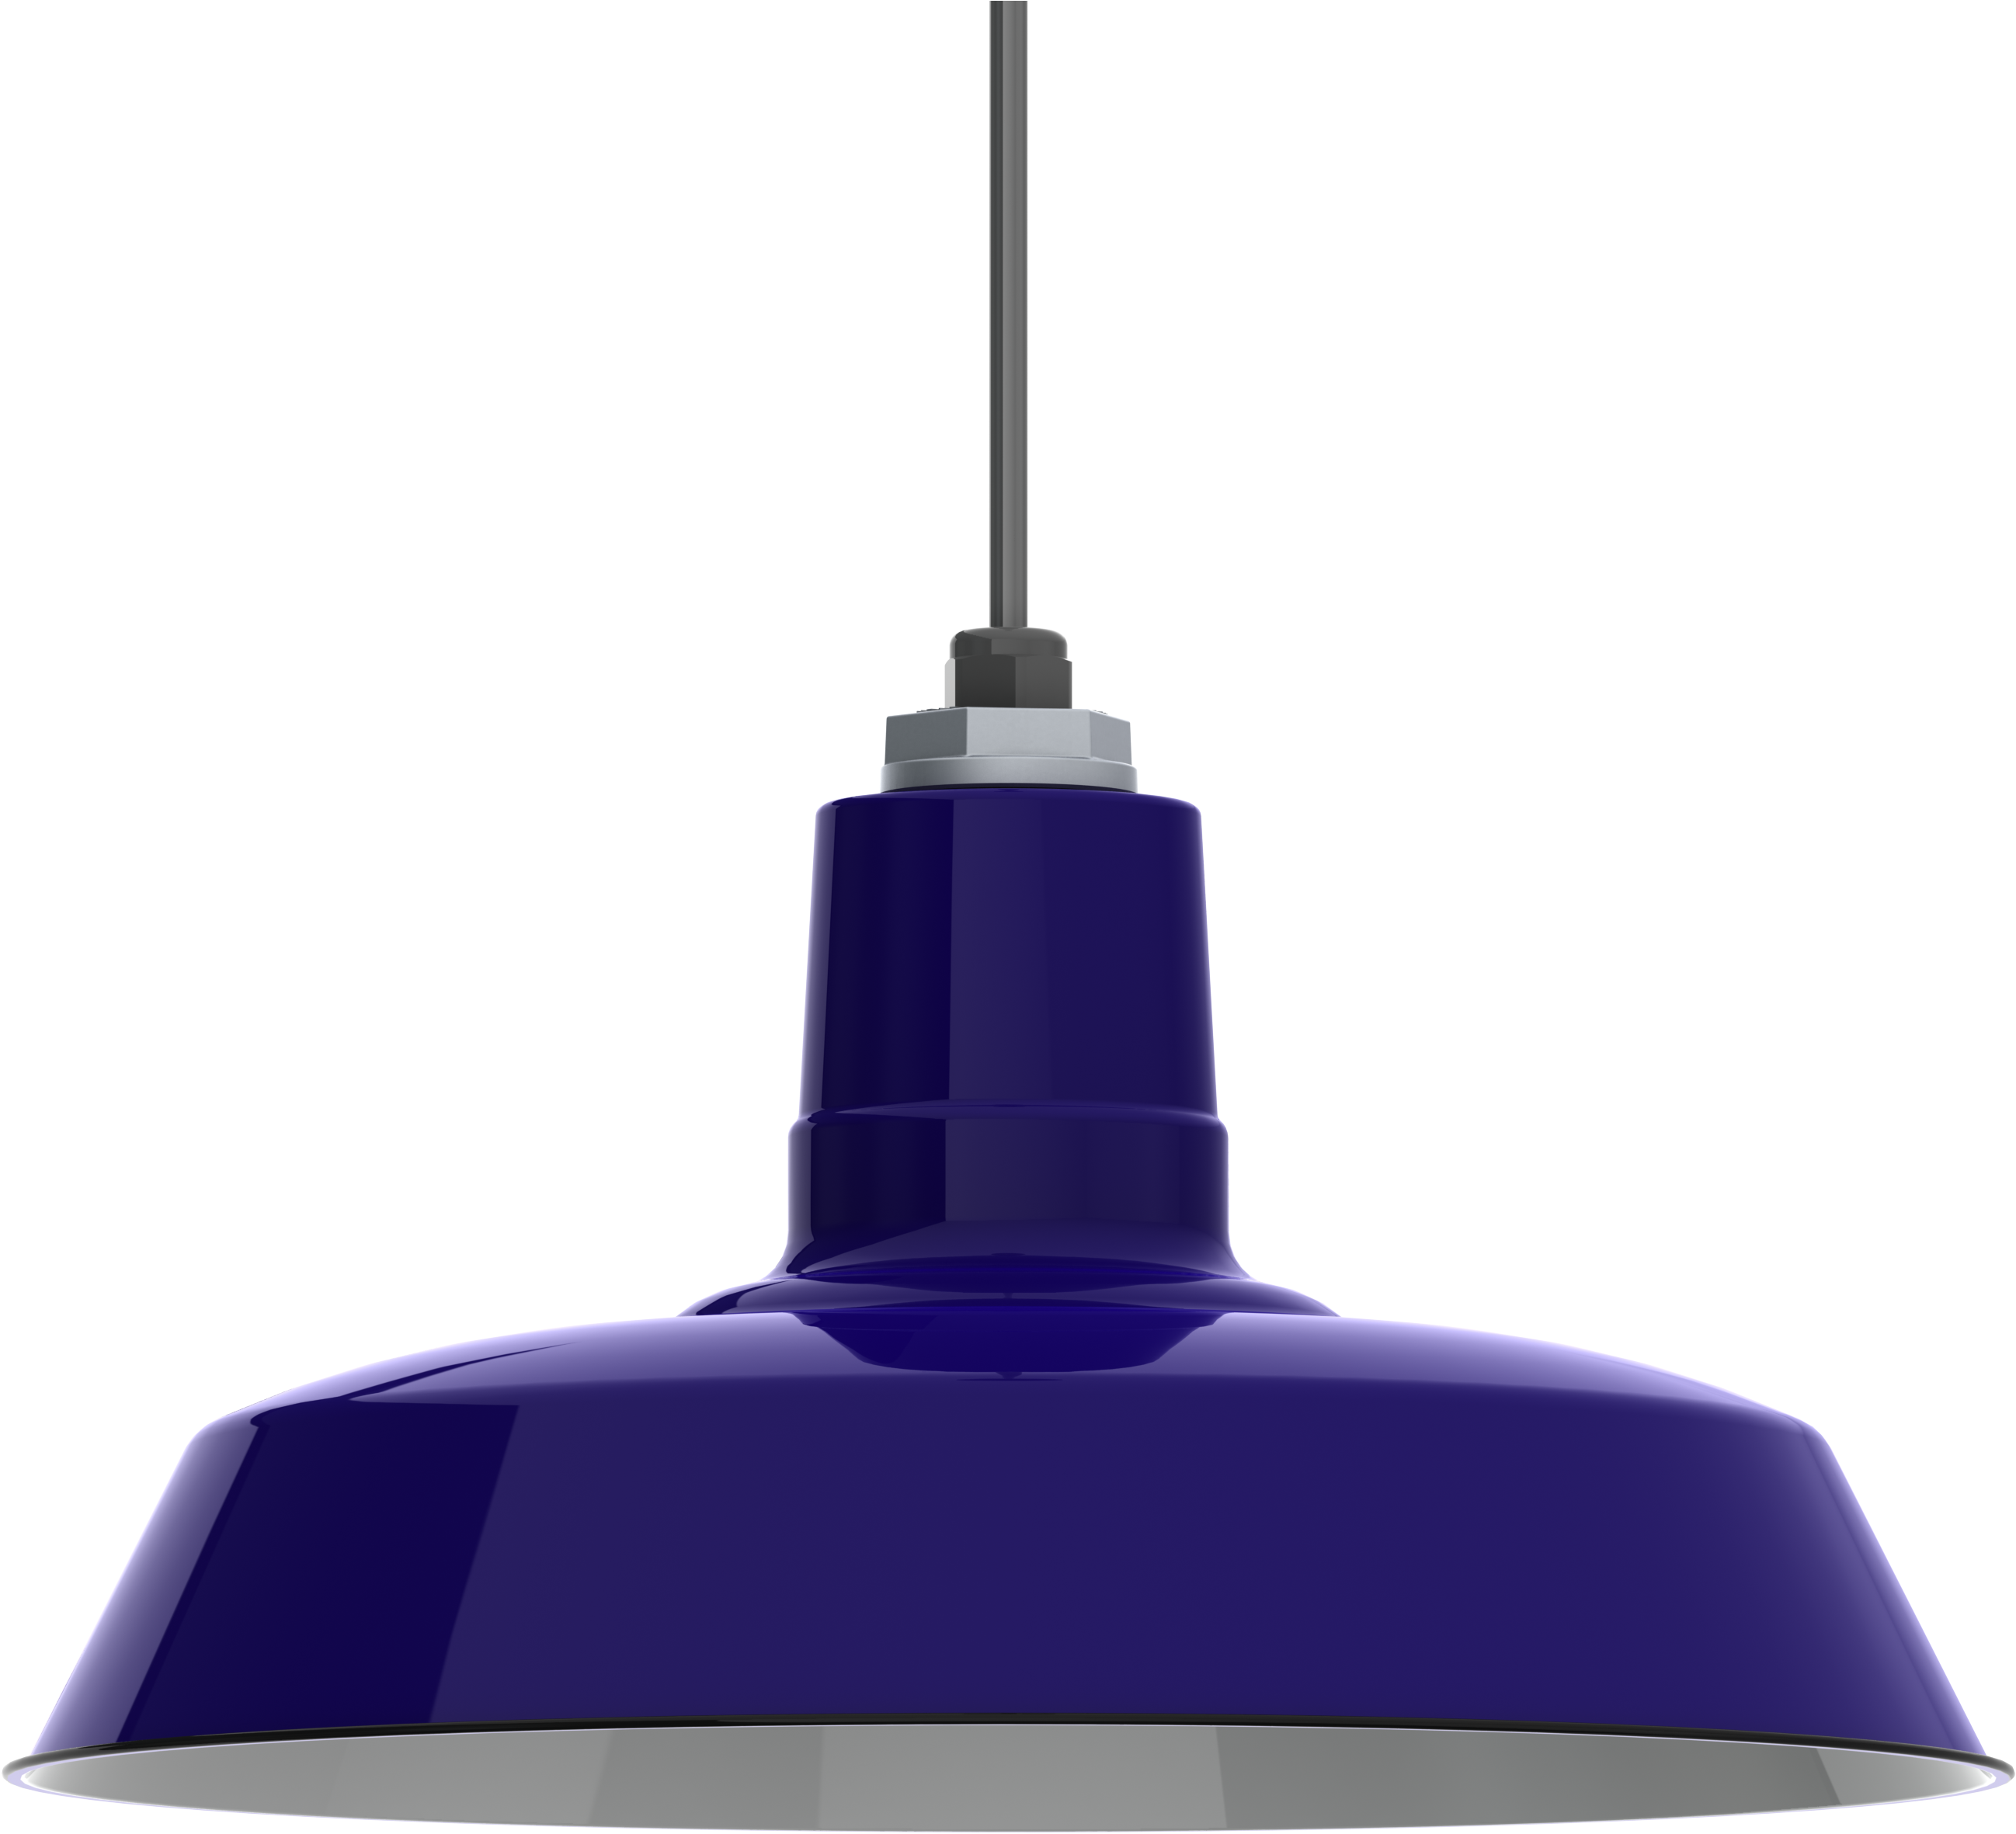 A Blue Light Fixture With A Black Background